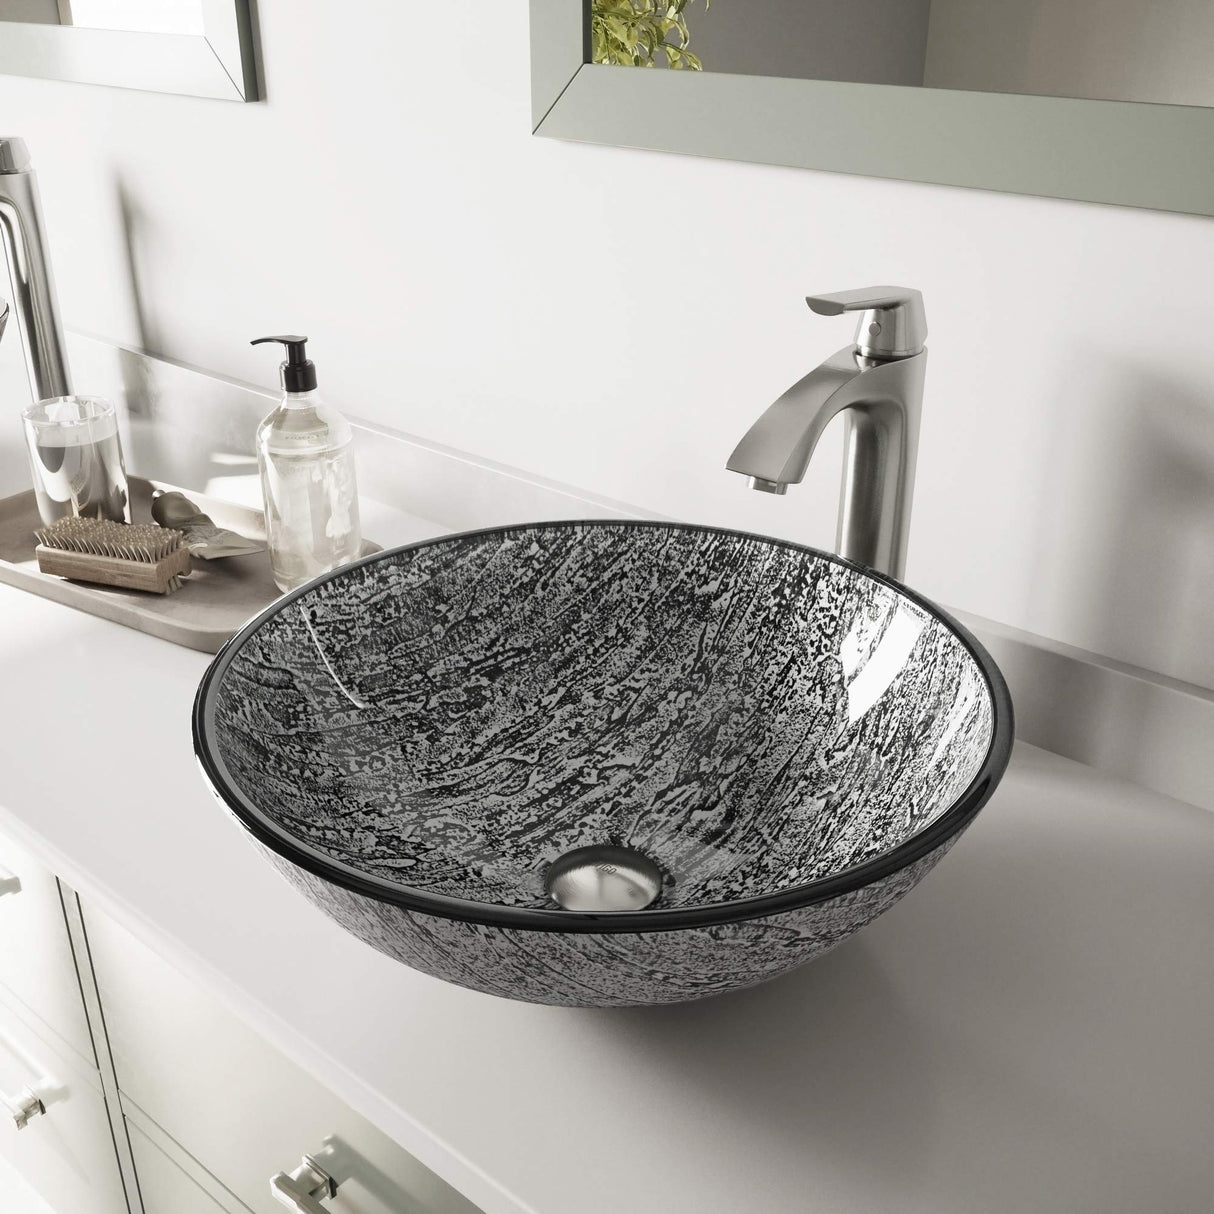 VIGO VGT559 16.5" L -16.5" W -12.38" H Titanium Handmade Glass Round Vessel Bathroom Sink Set in Slate Grey Finish with Brushed Nickel Single-Handle Single Hole Faucet and Pop Up Drain